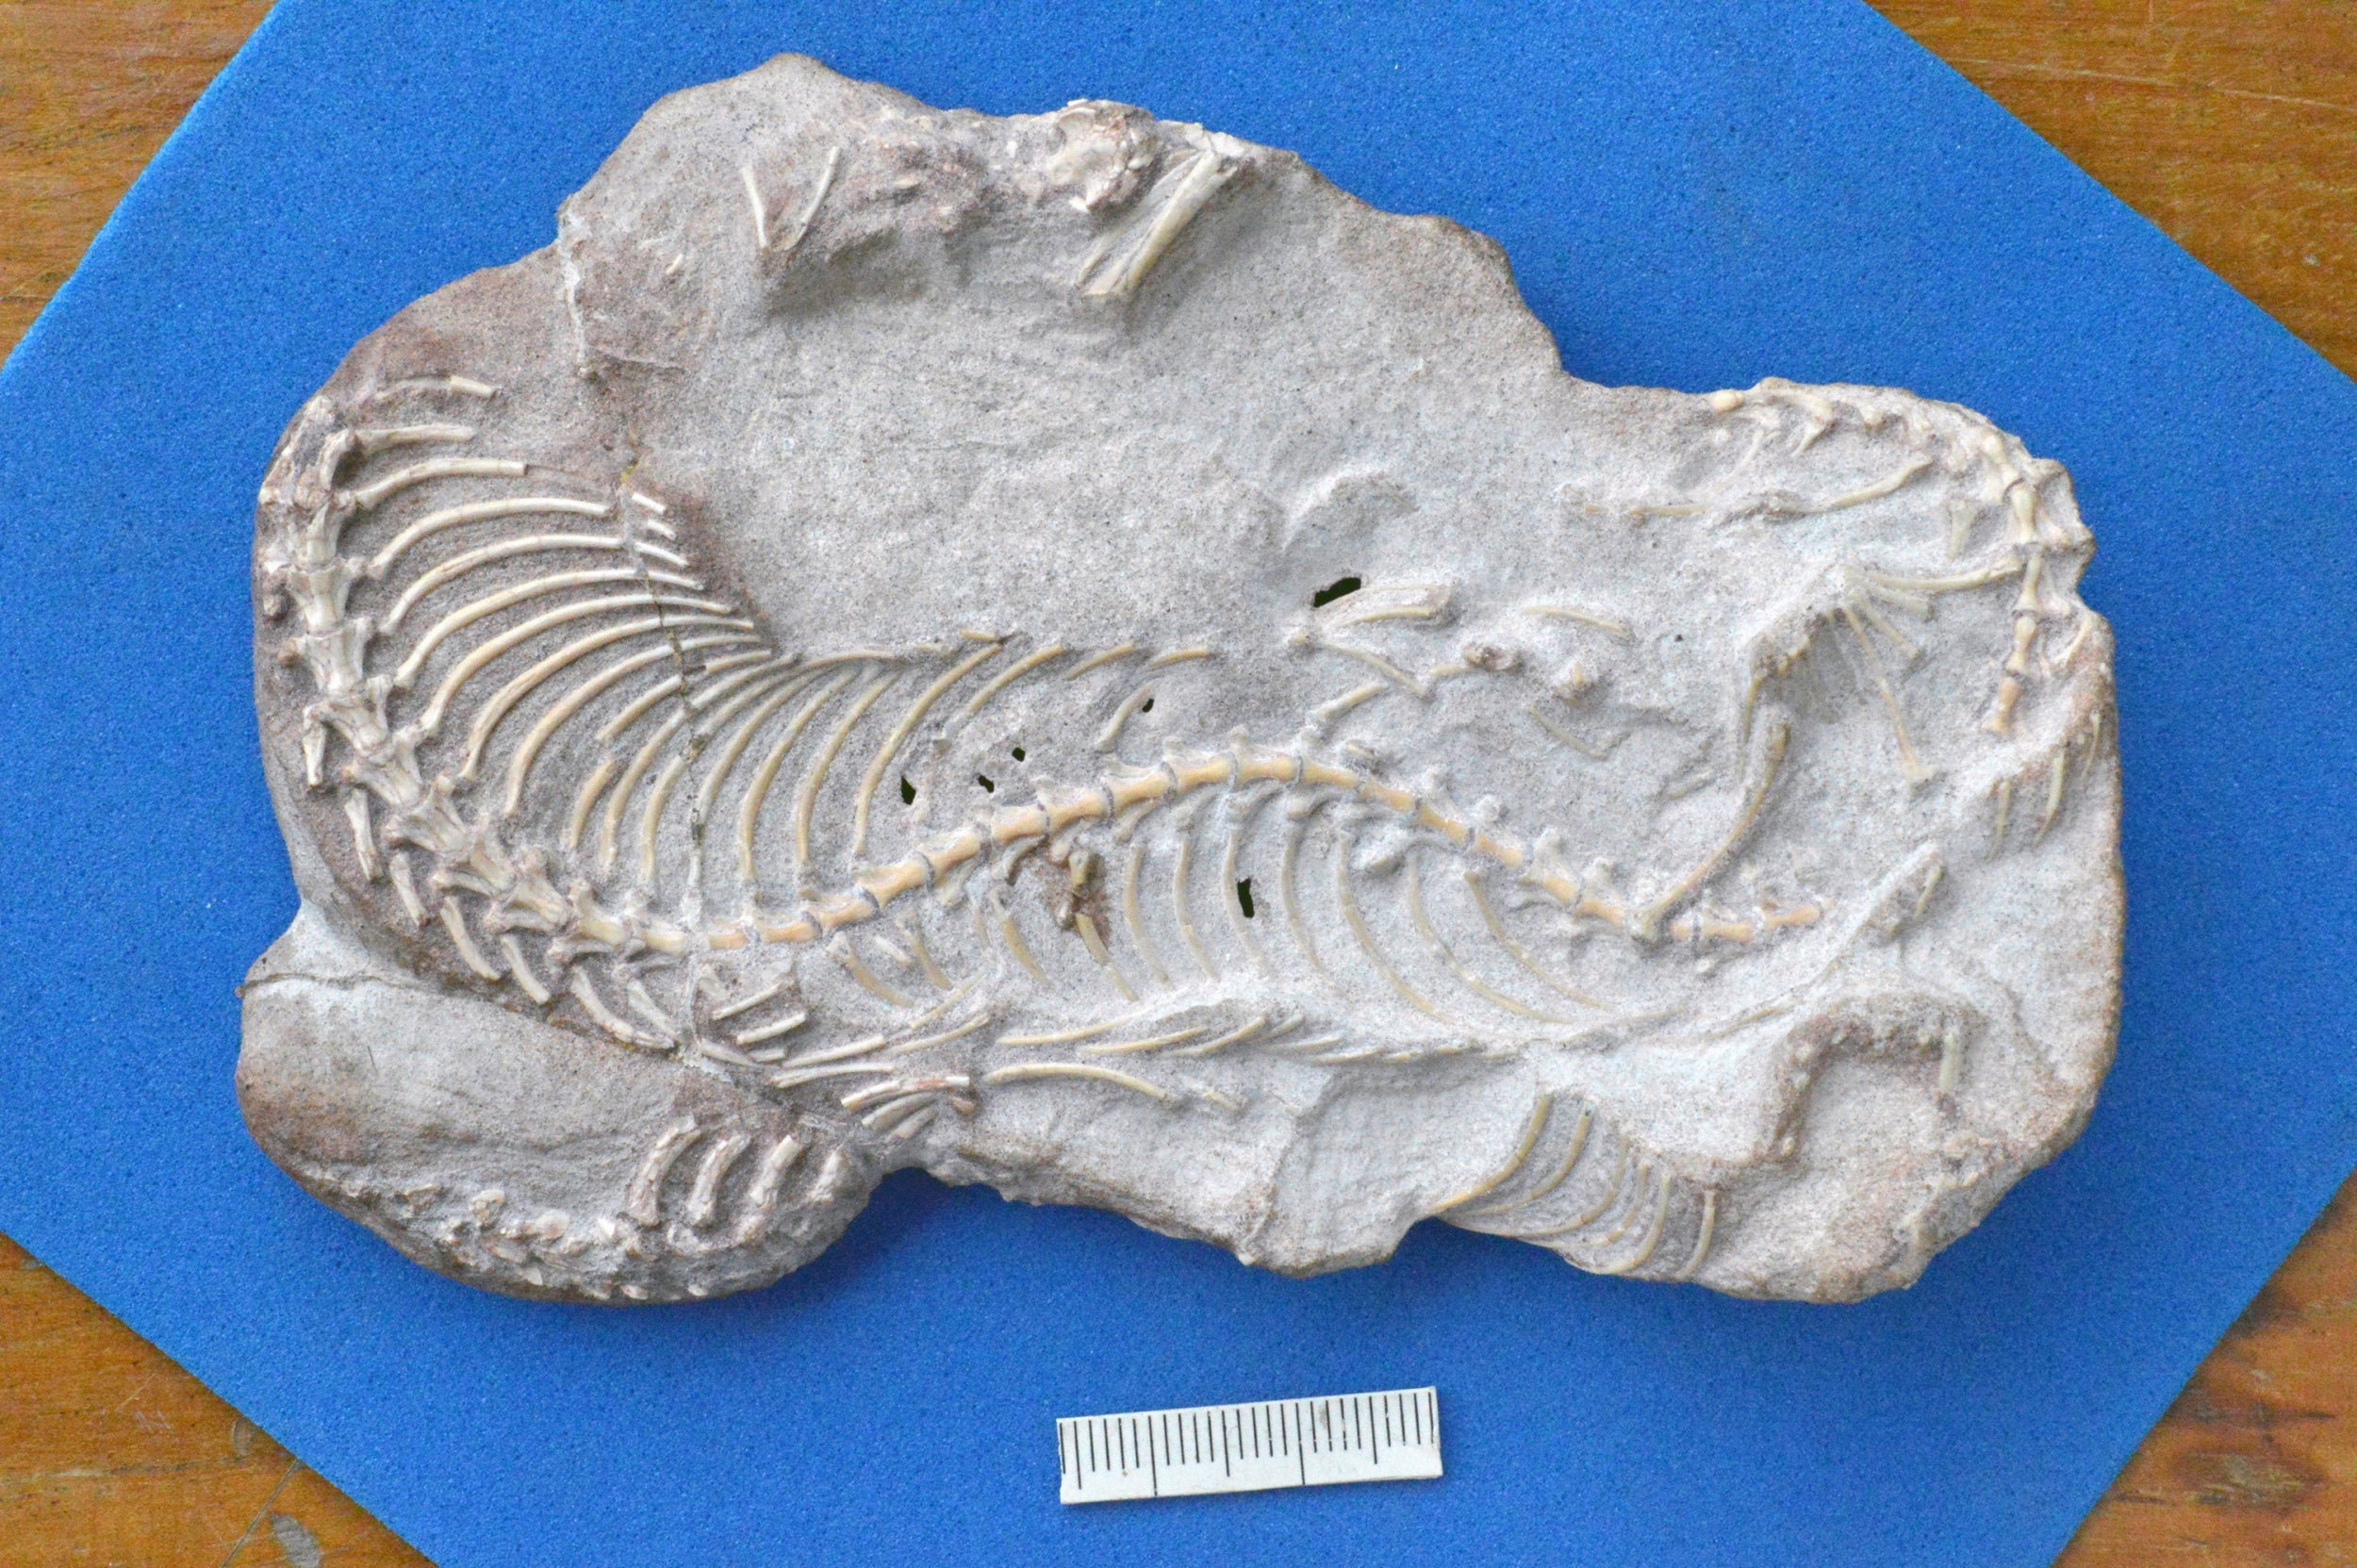 A fossil belonging to the extinct snake group Najash, which still retained their hind legs